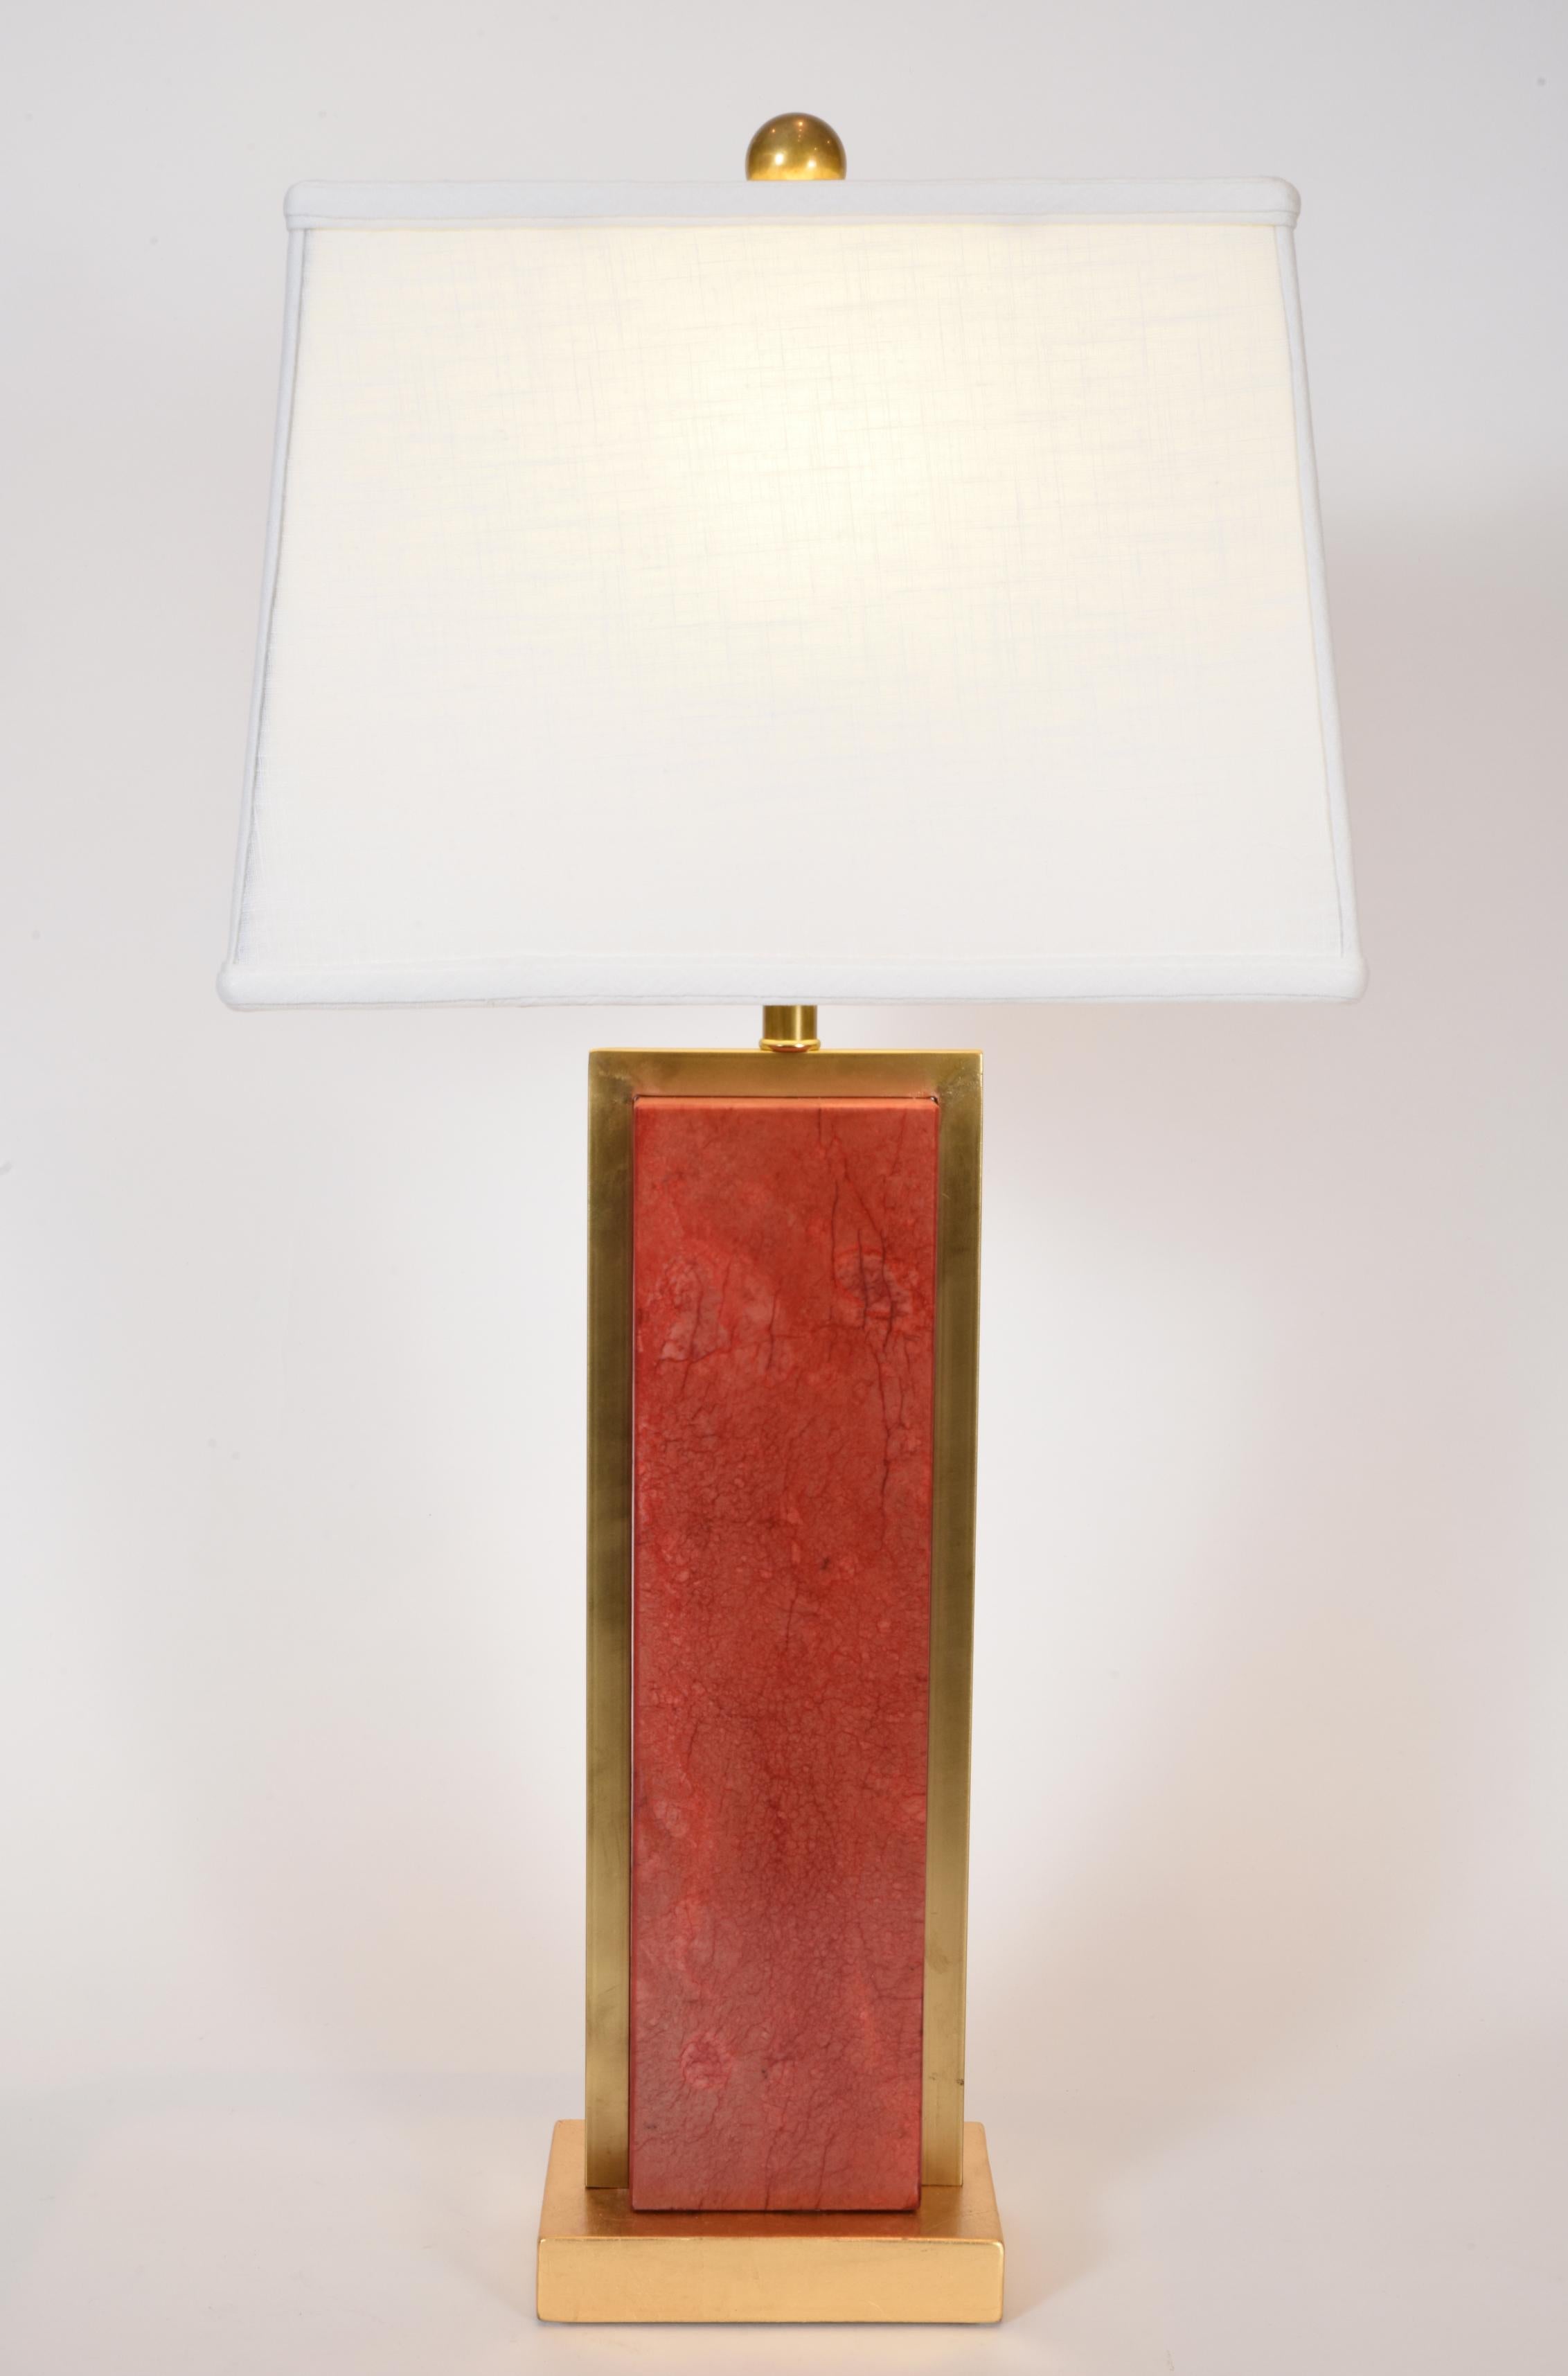 Pair of orange jade task / table lamps with brass frame accent design details with gold wooden base. Each lamp is in excellent working condition. Rewired for US use. Each lamp comes with a rectangle linen exterior / silk interior shade. Each shade